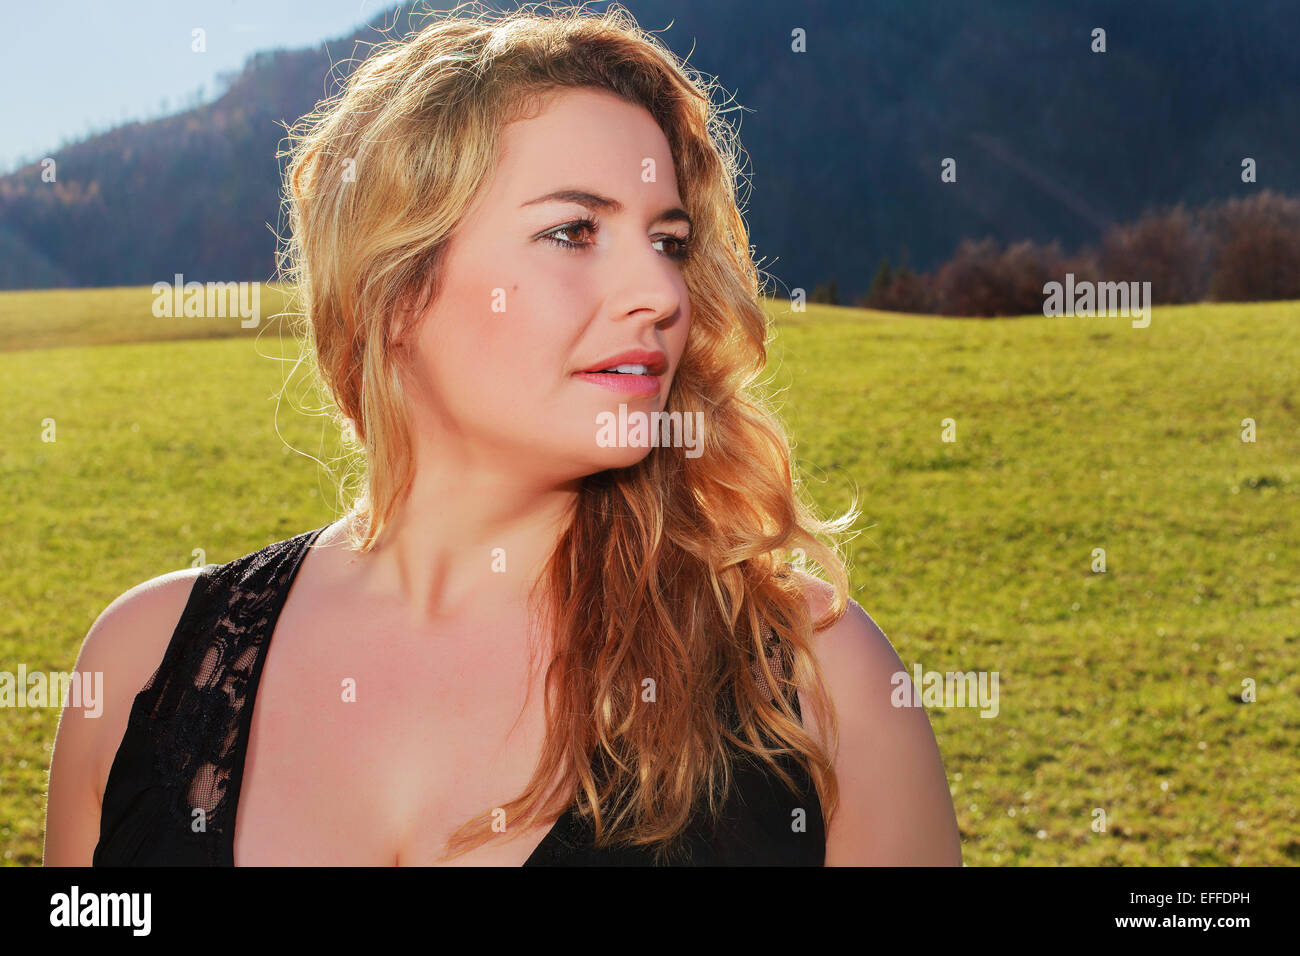 Portrait of a woman with long blond hair and oversize Stock Photo